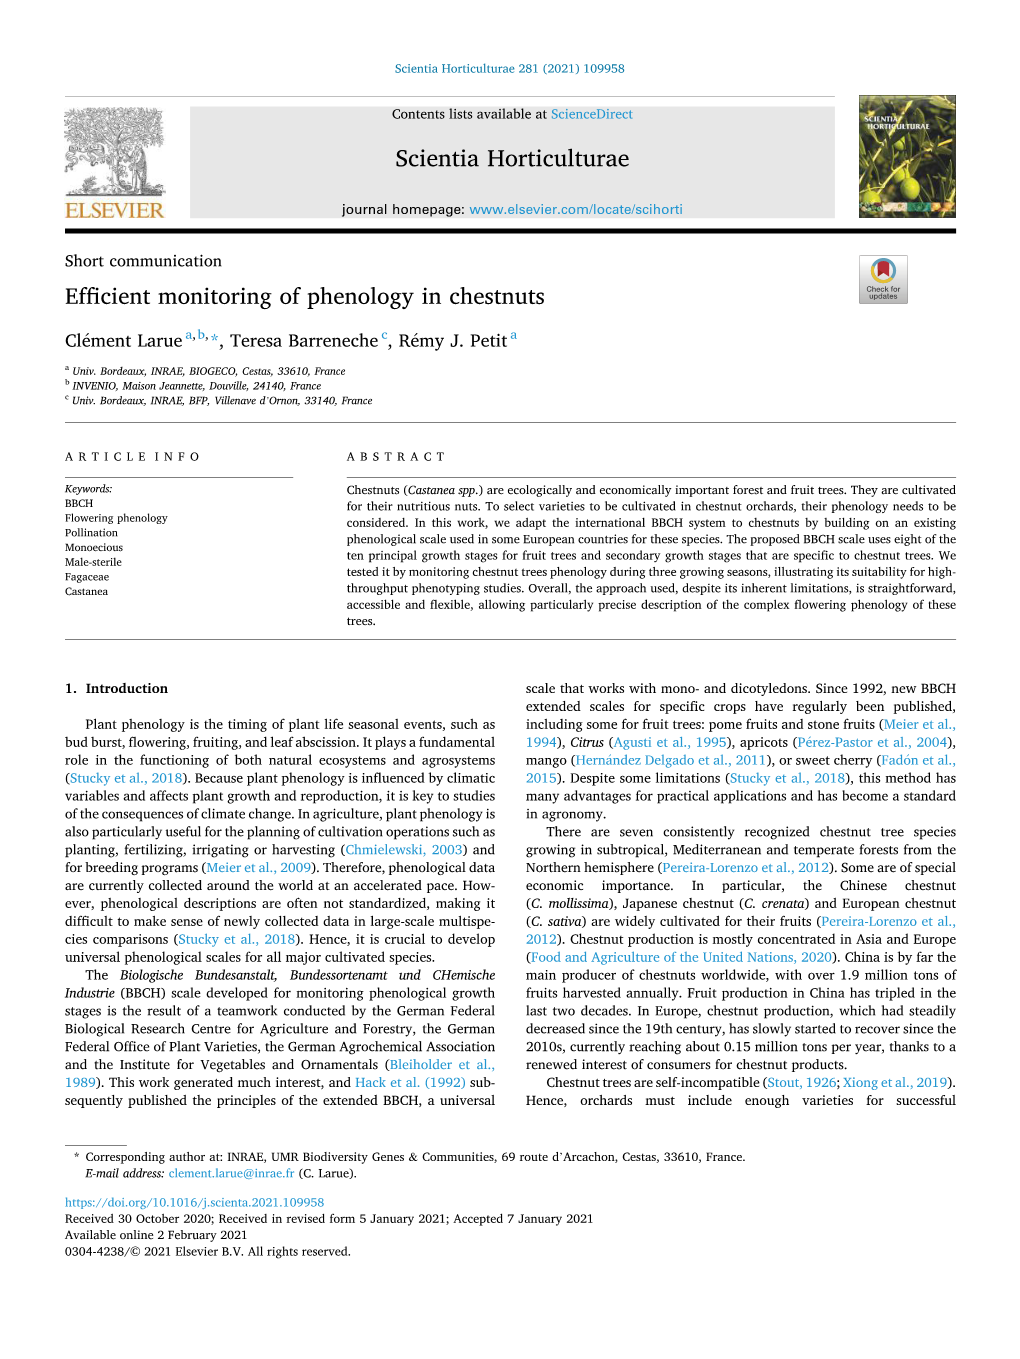 Efficient Monitoring of Phenology in Chestnuts